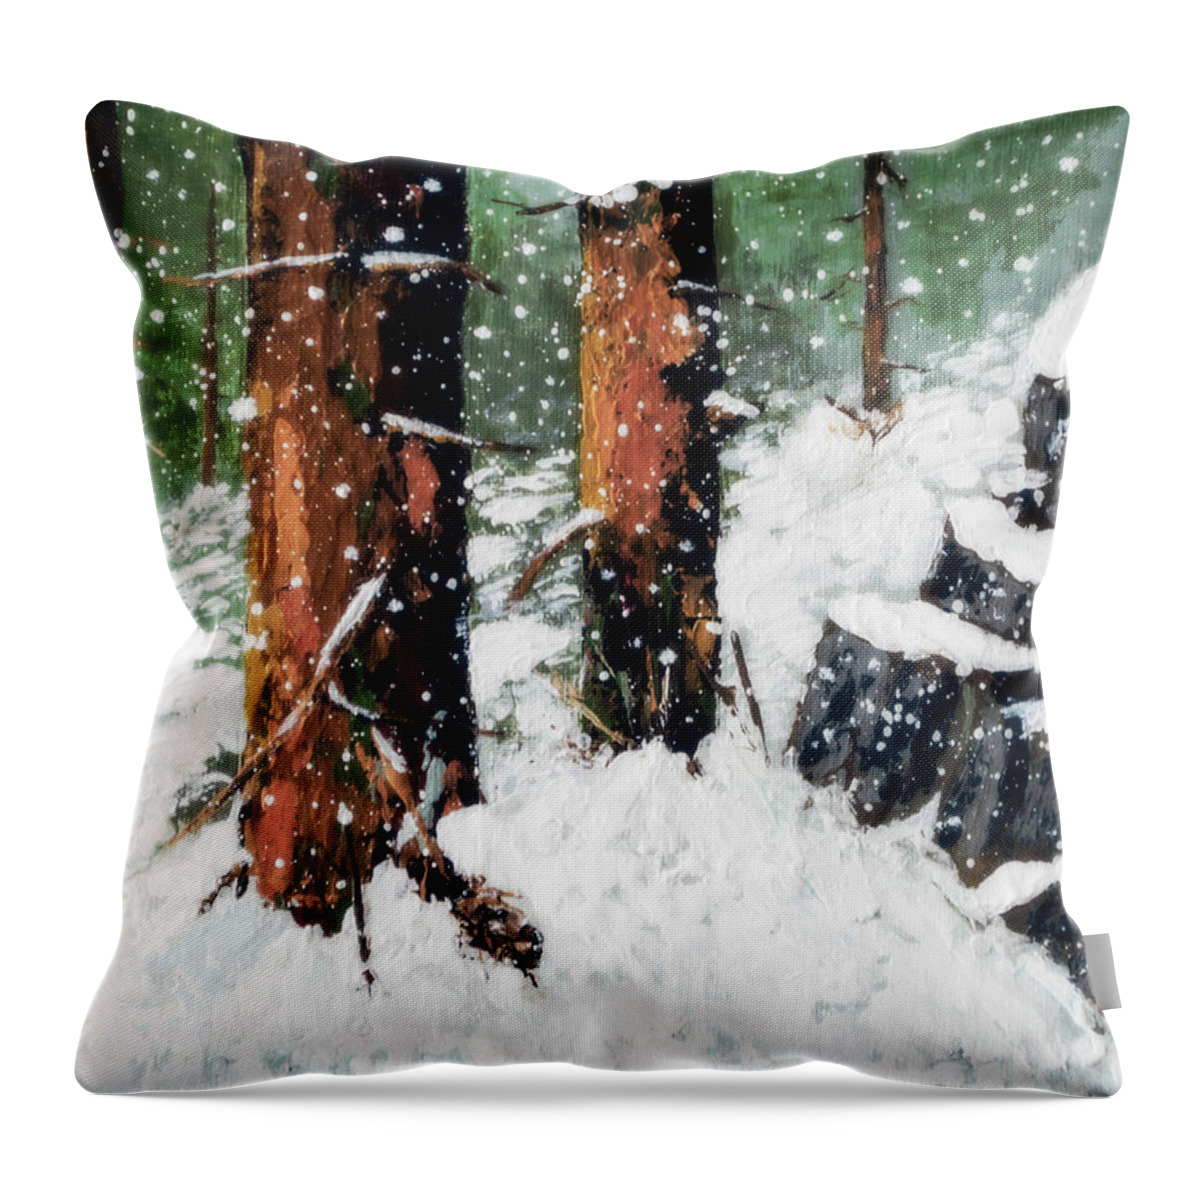 Redwood In Snow Throw Pillow featuring the painting Snowy Redwood Dream by L J Oakes